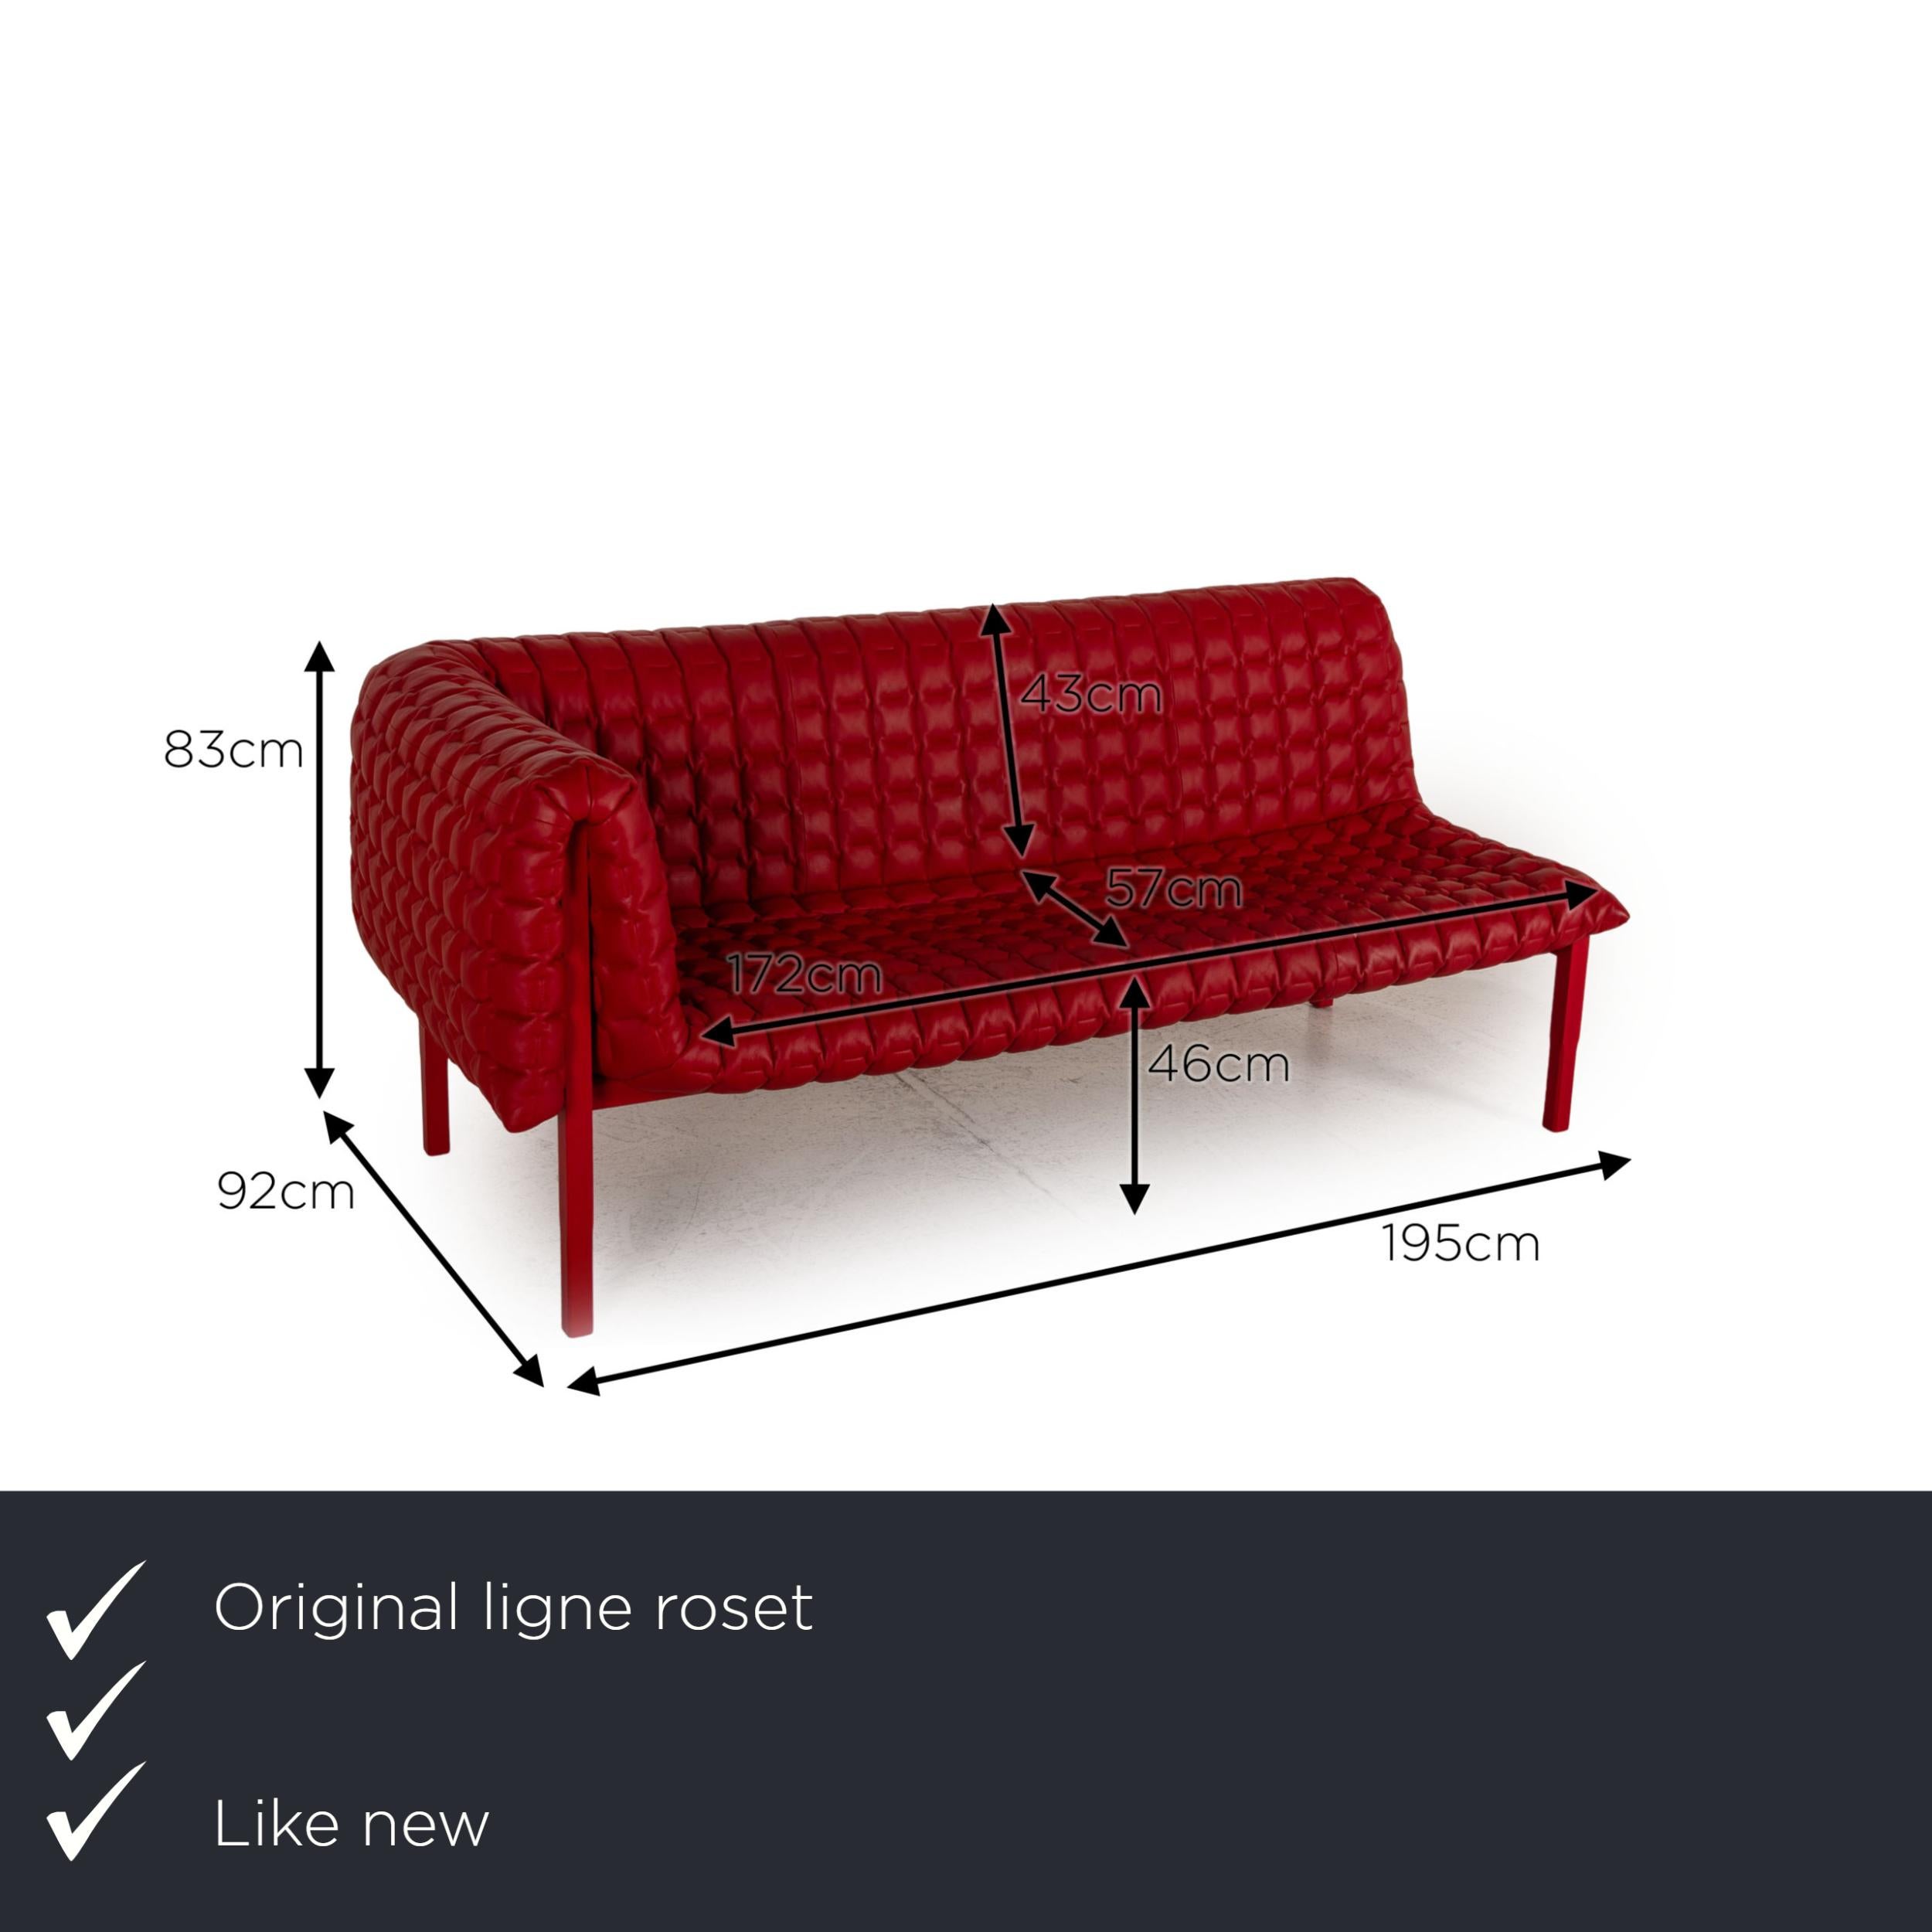 We present to you a ligne roset Ruché leather lounger red sofa couch Meridienne chaise longue.
 

 Product measurements in centimeters:
 

Depth: 92
Width: 195
Height: 83
Seat height: 46
Rest height: 81
Seat depth: 57
Seat width: